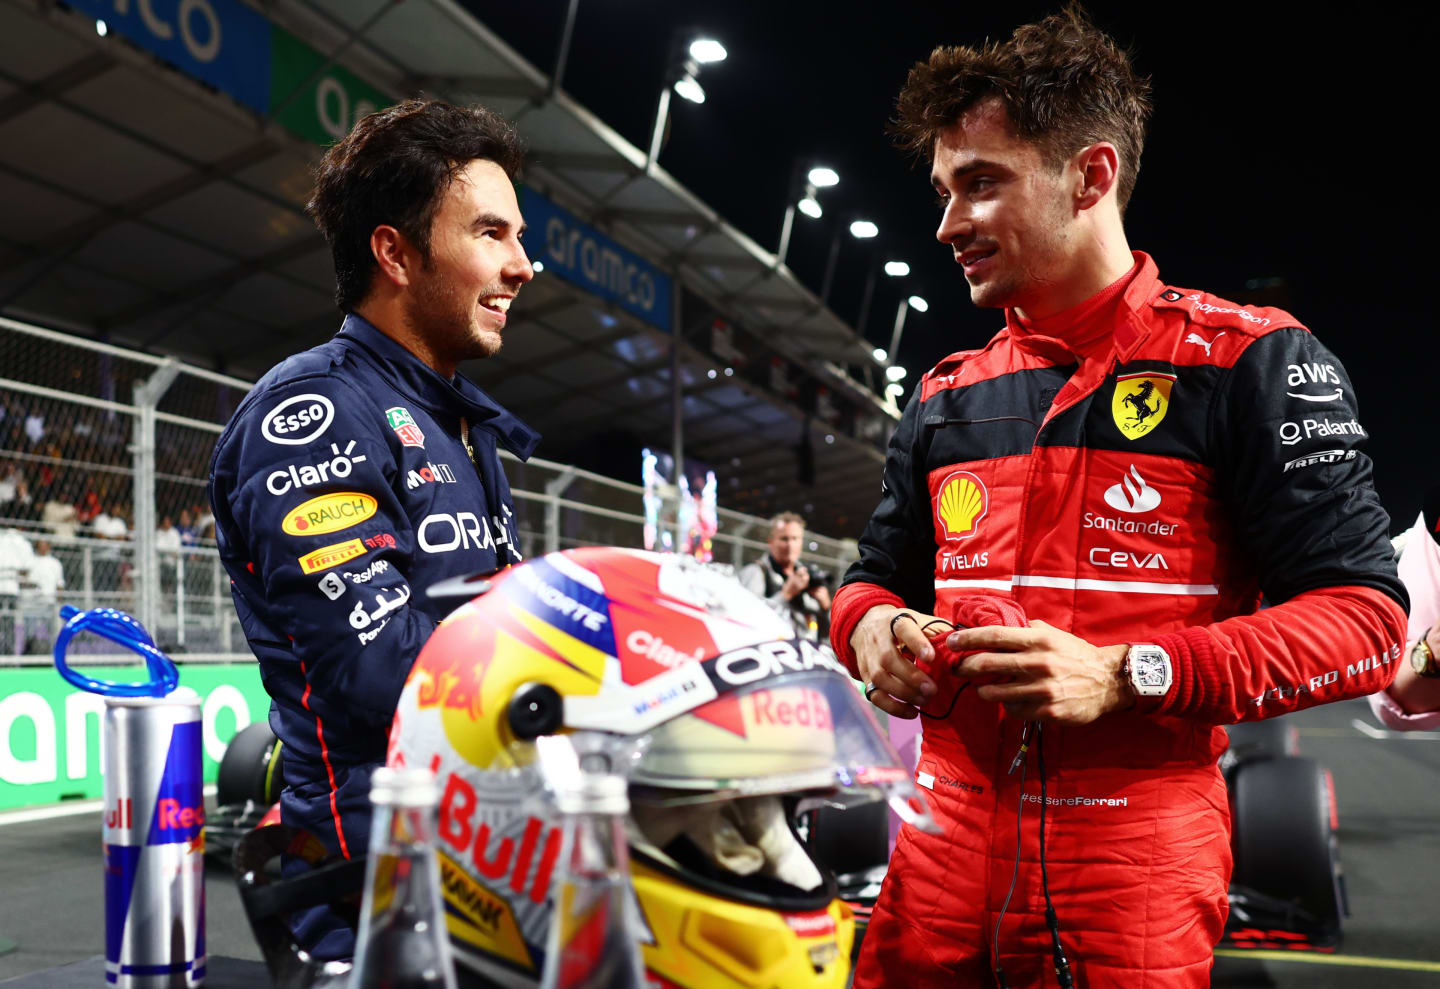 JEDDAH, SAUDI ARABIA - MARCH 26: Second placed qualifier Charles Leclerc of Monaco and Ferrari (R) talks to Pole position qualifier Sergio Perez of Mexico and Oracle Red Bull Racing (L) in parc ferme during qualifying ahead of the F1 Grand Prix of Saudi Arabia at the Jeddah Corniche Circuit on March 26, 2022 in Jeddah, Saudi Arabia. (Photo by Mark Thompson/Getty Images)